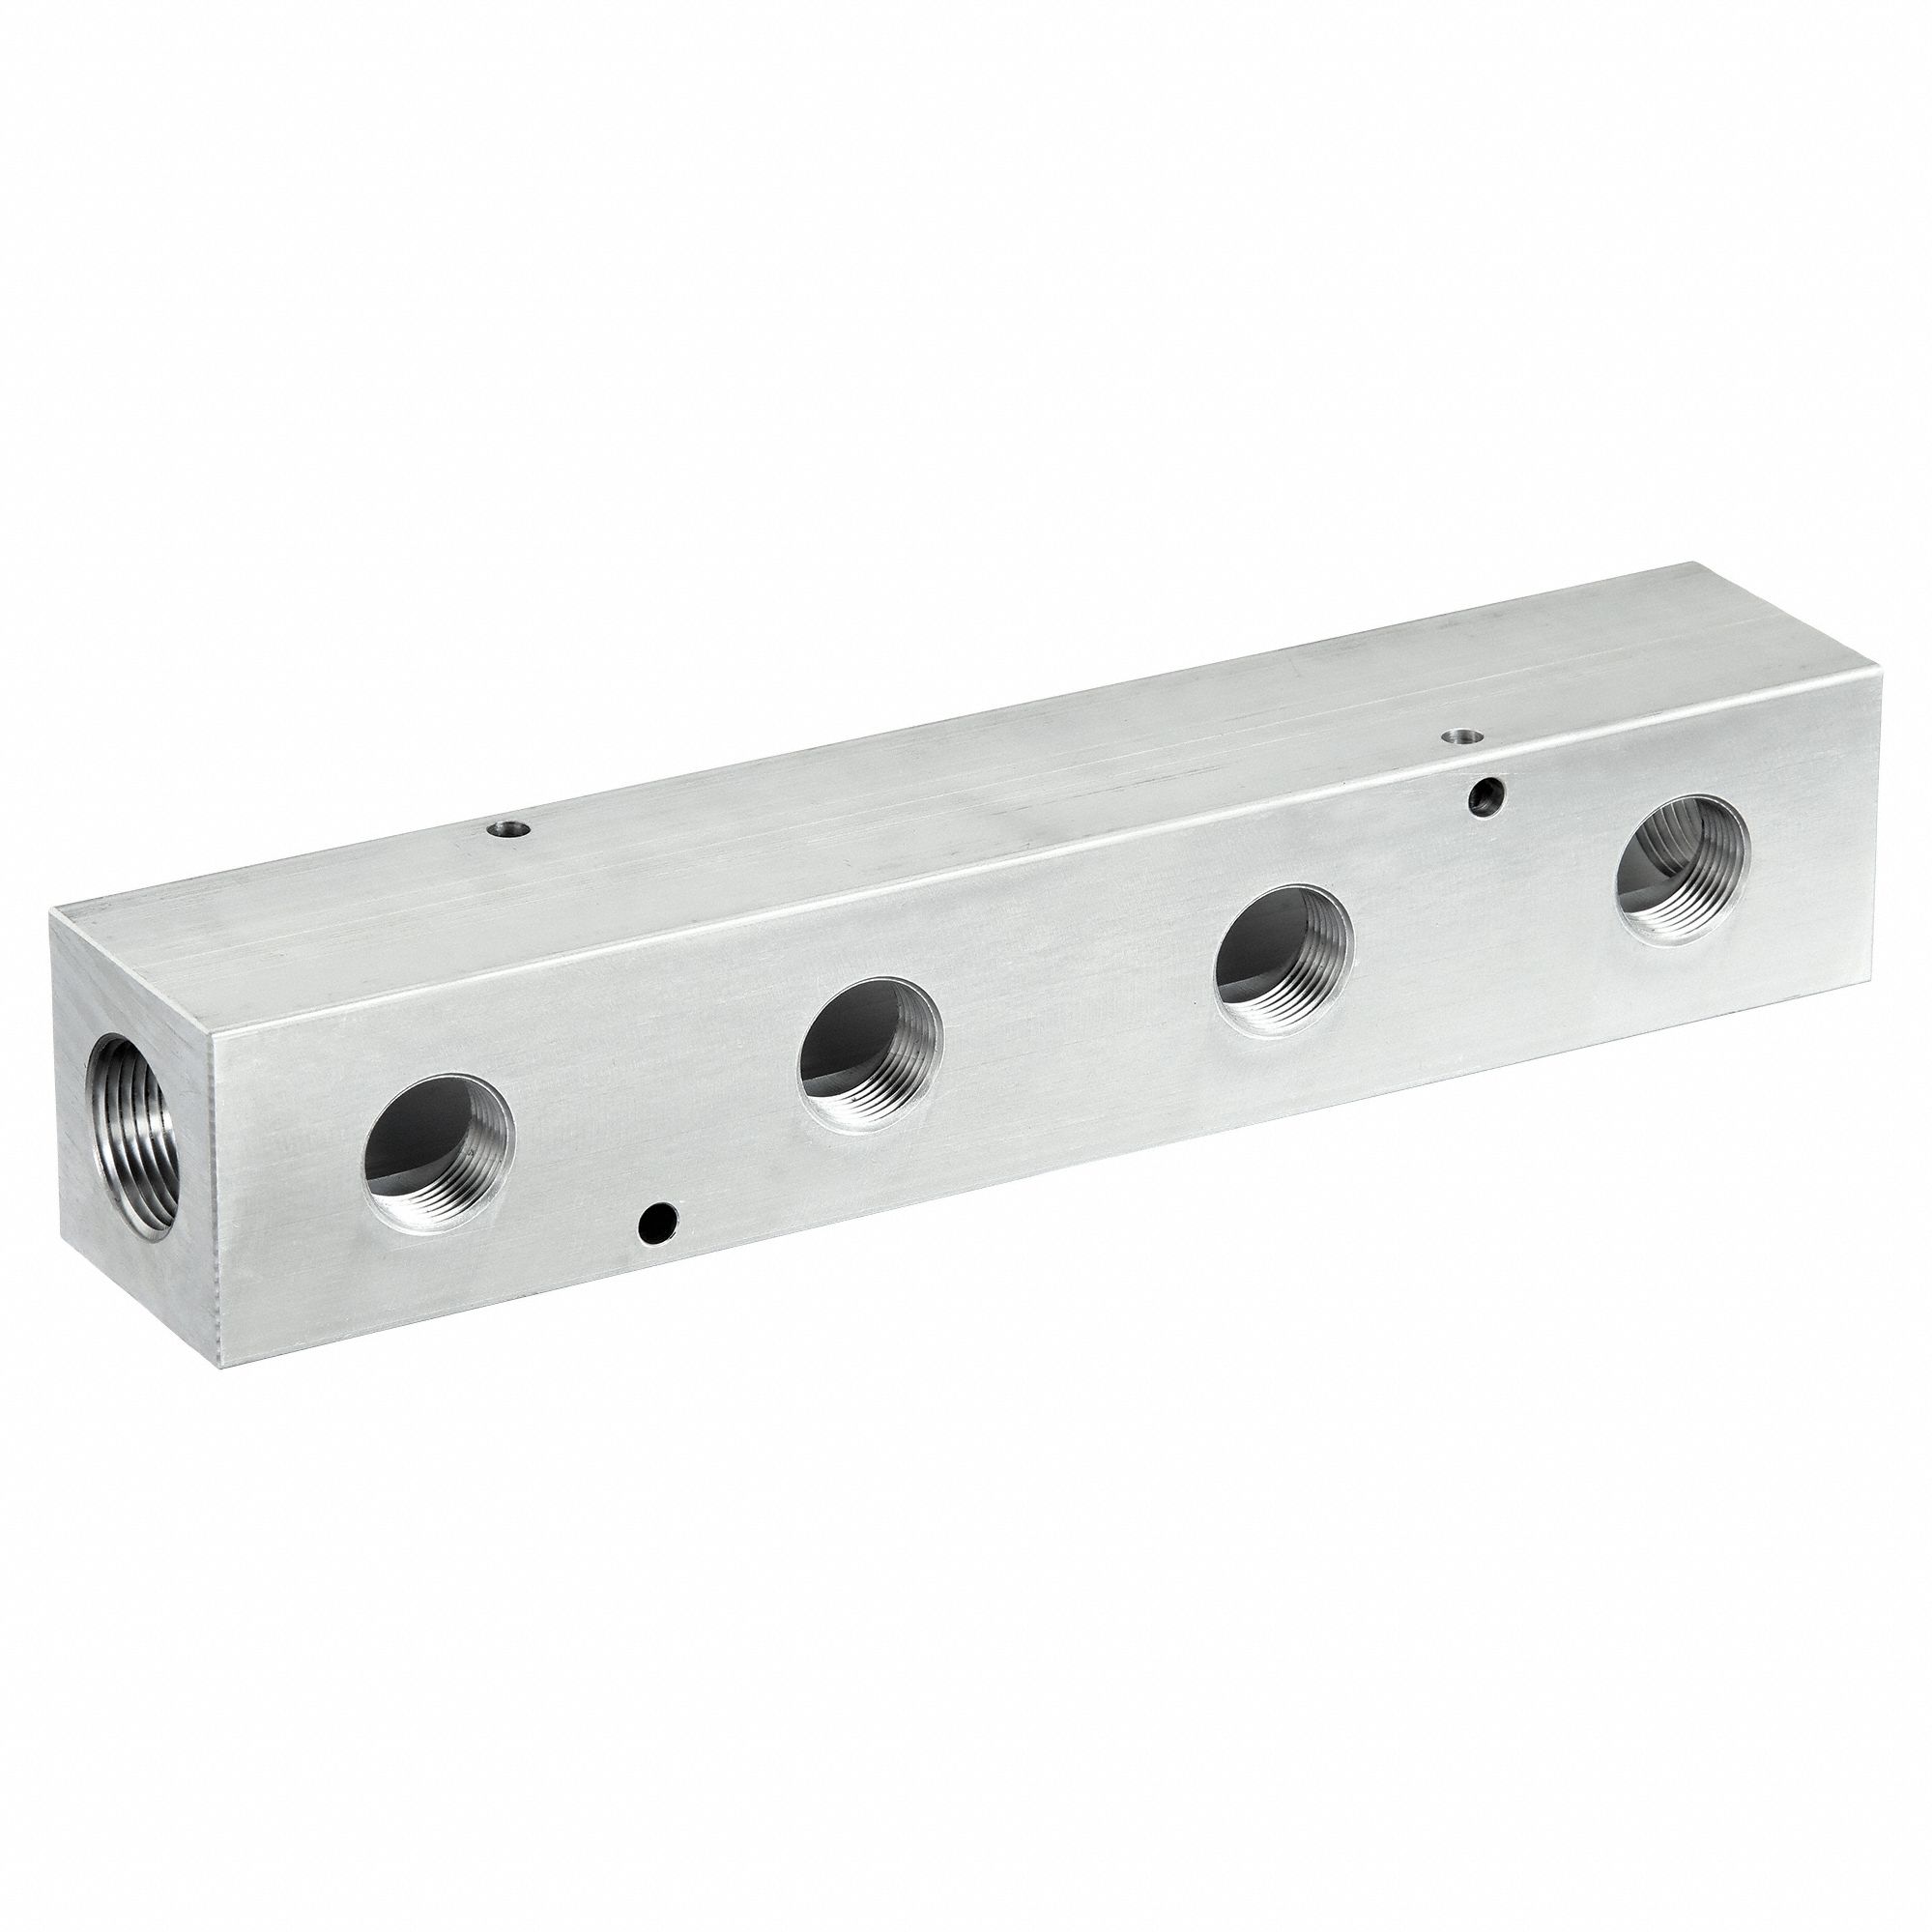 MANIFOLD,4 OUTLETS,OUTLET SIZE 3/4